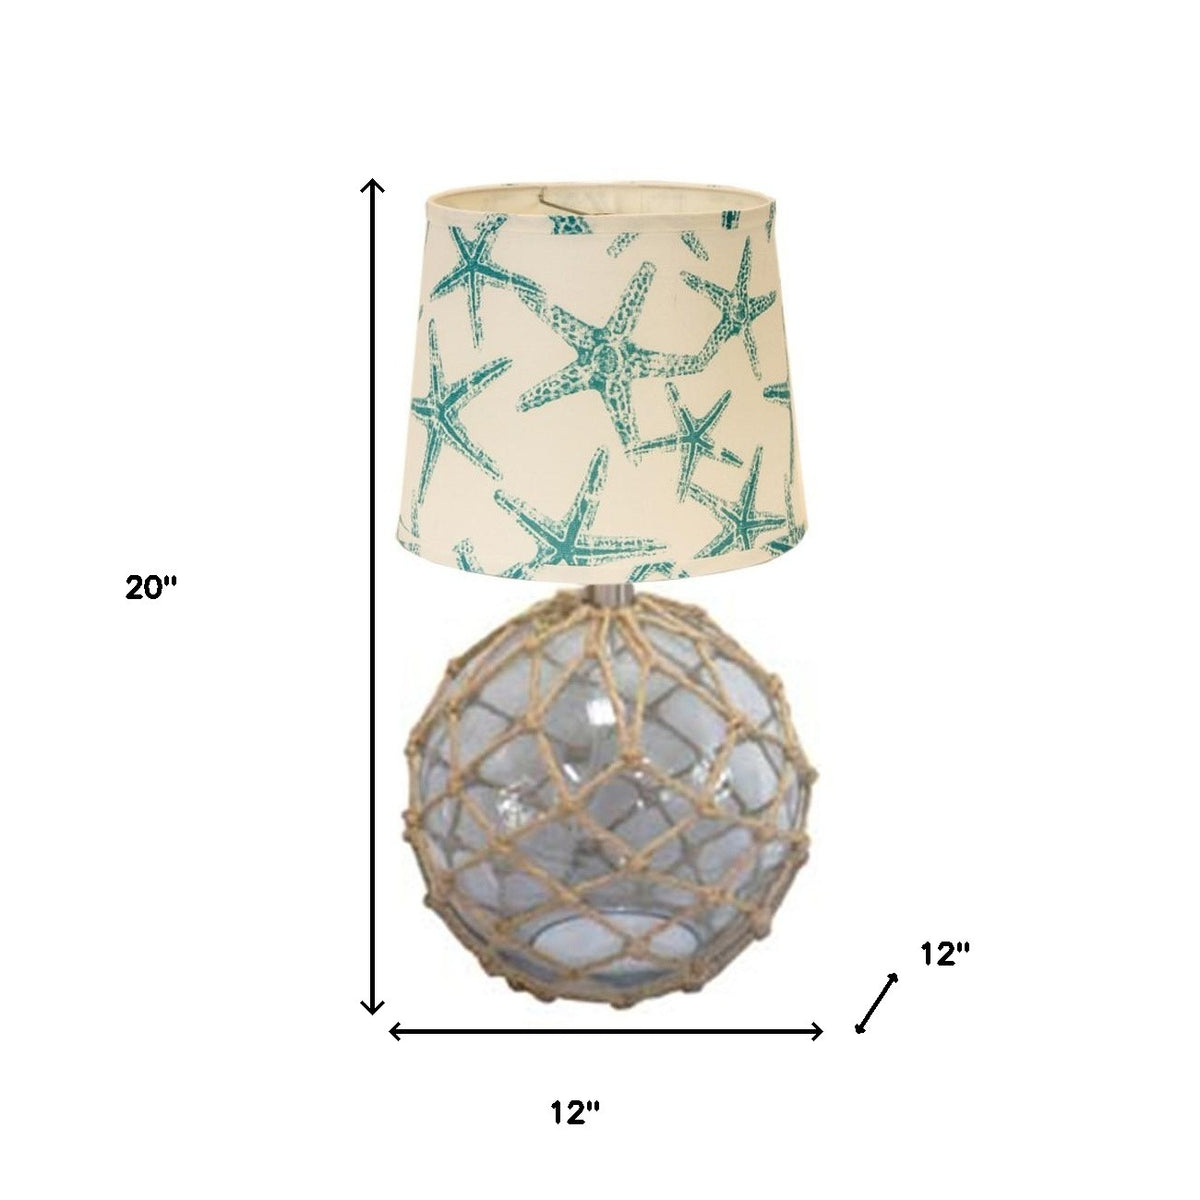 Cape Netted Glass Teal Starfish Accent Lamp